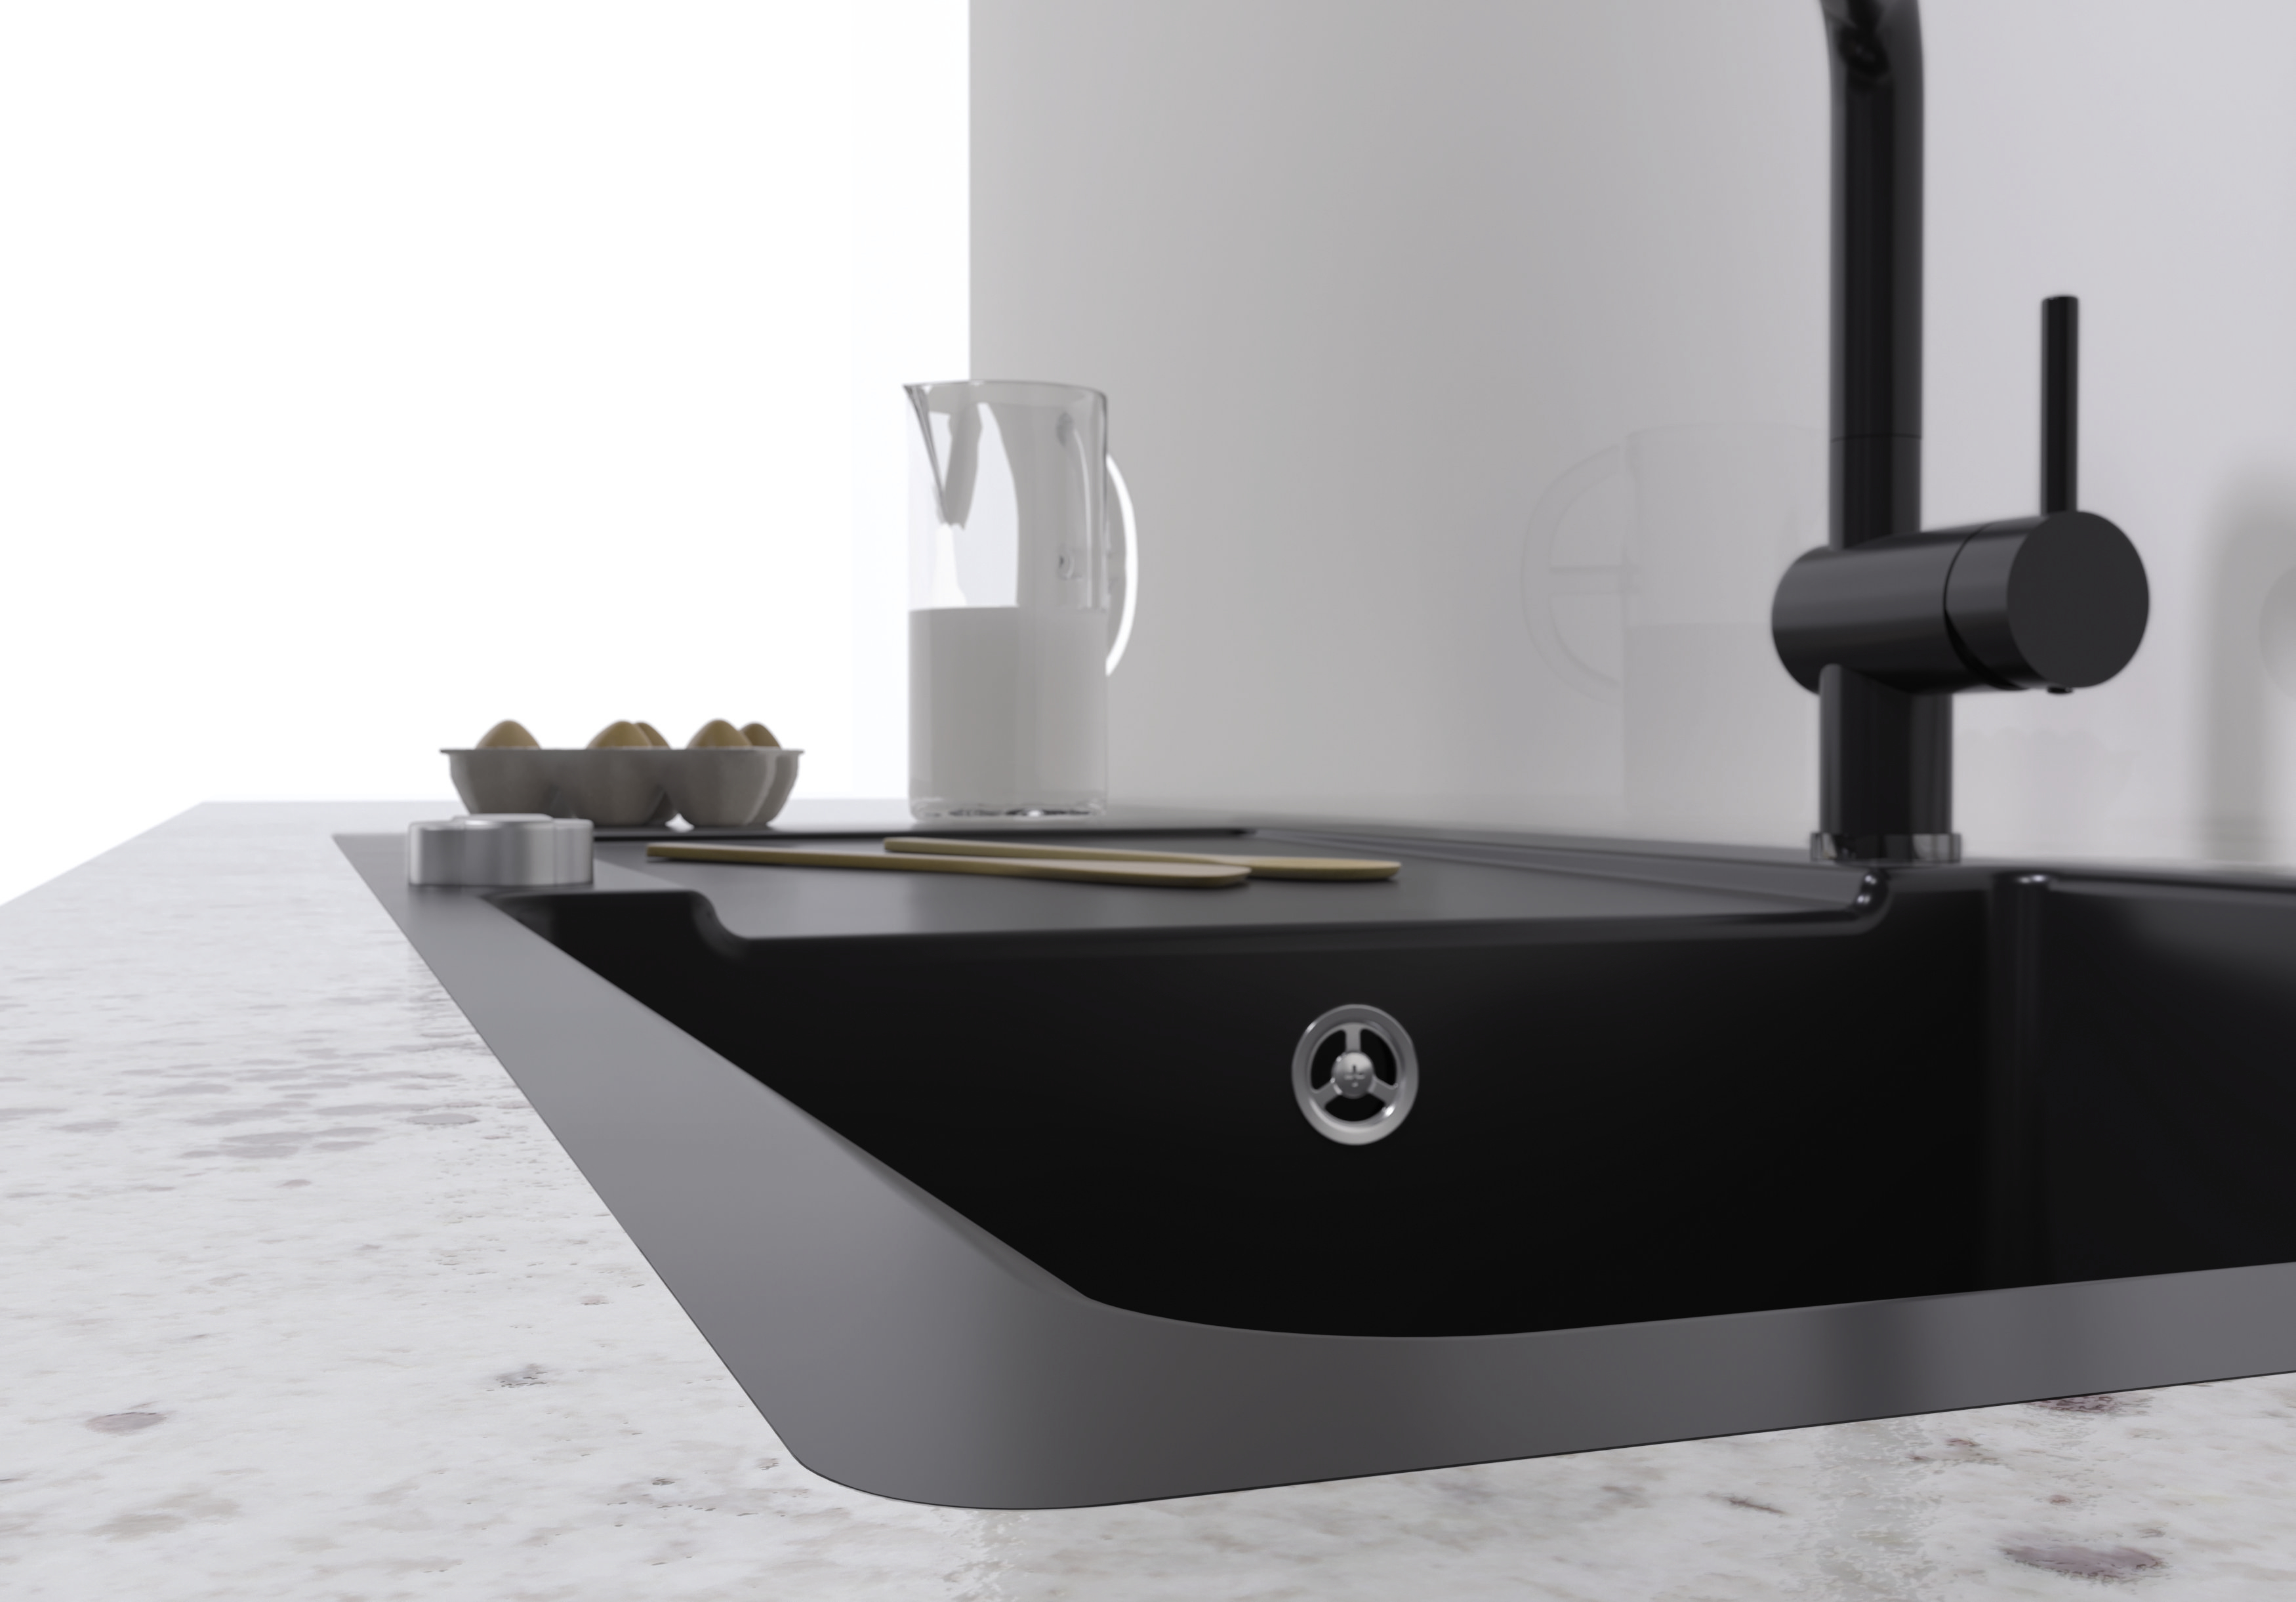 Flushmount sinks feature straight lines and exude calm. The sink fits smoothly into the surface